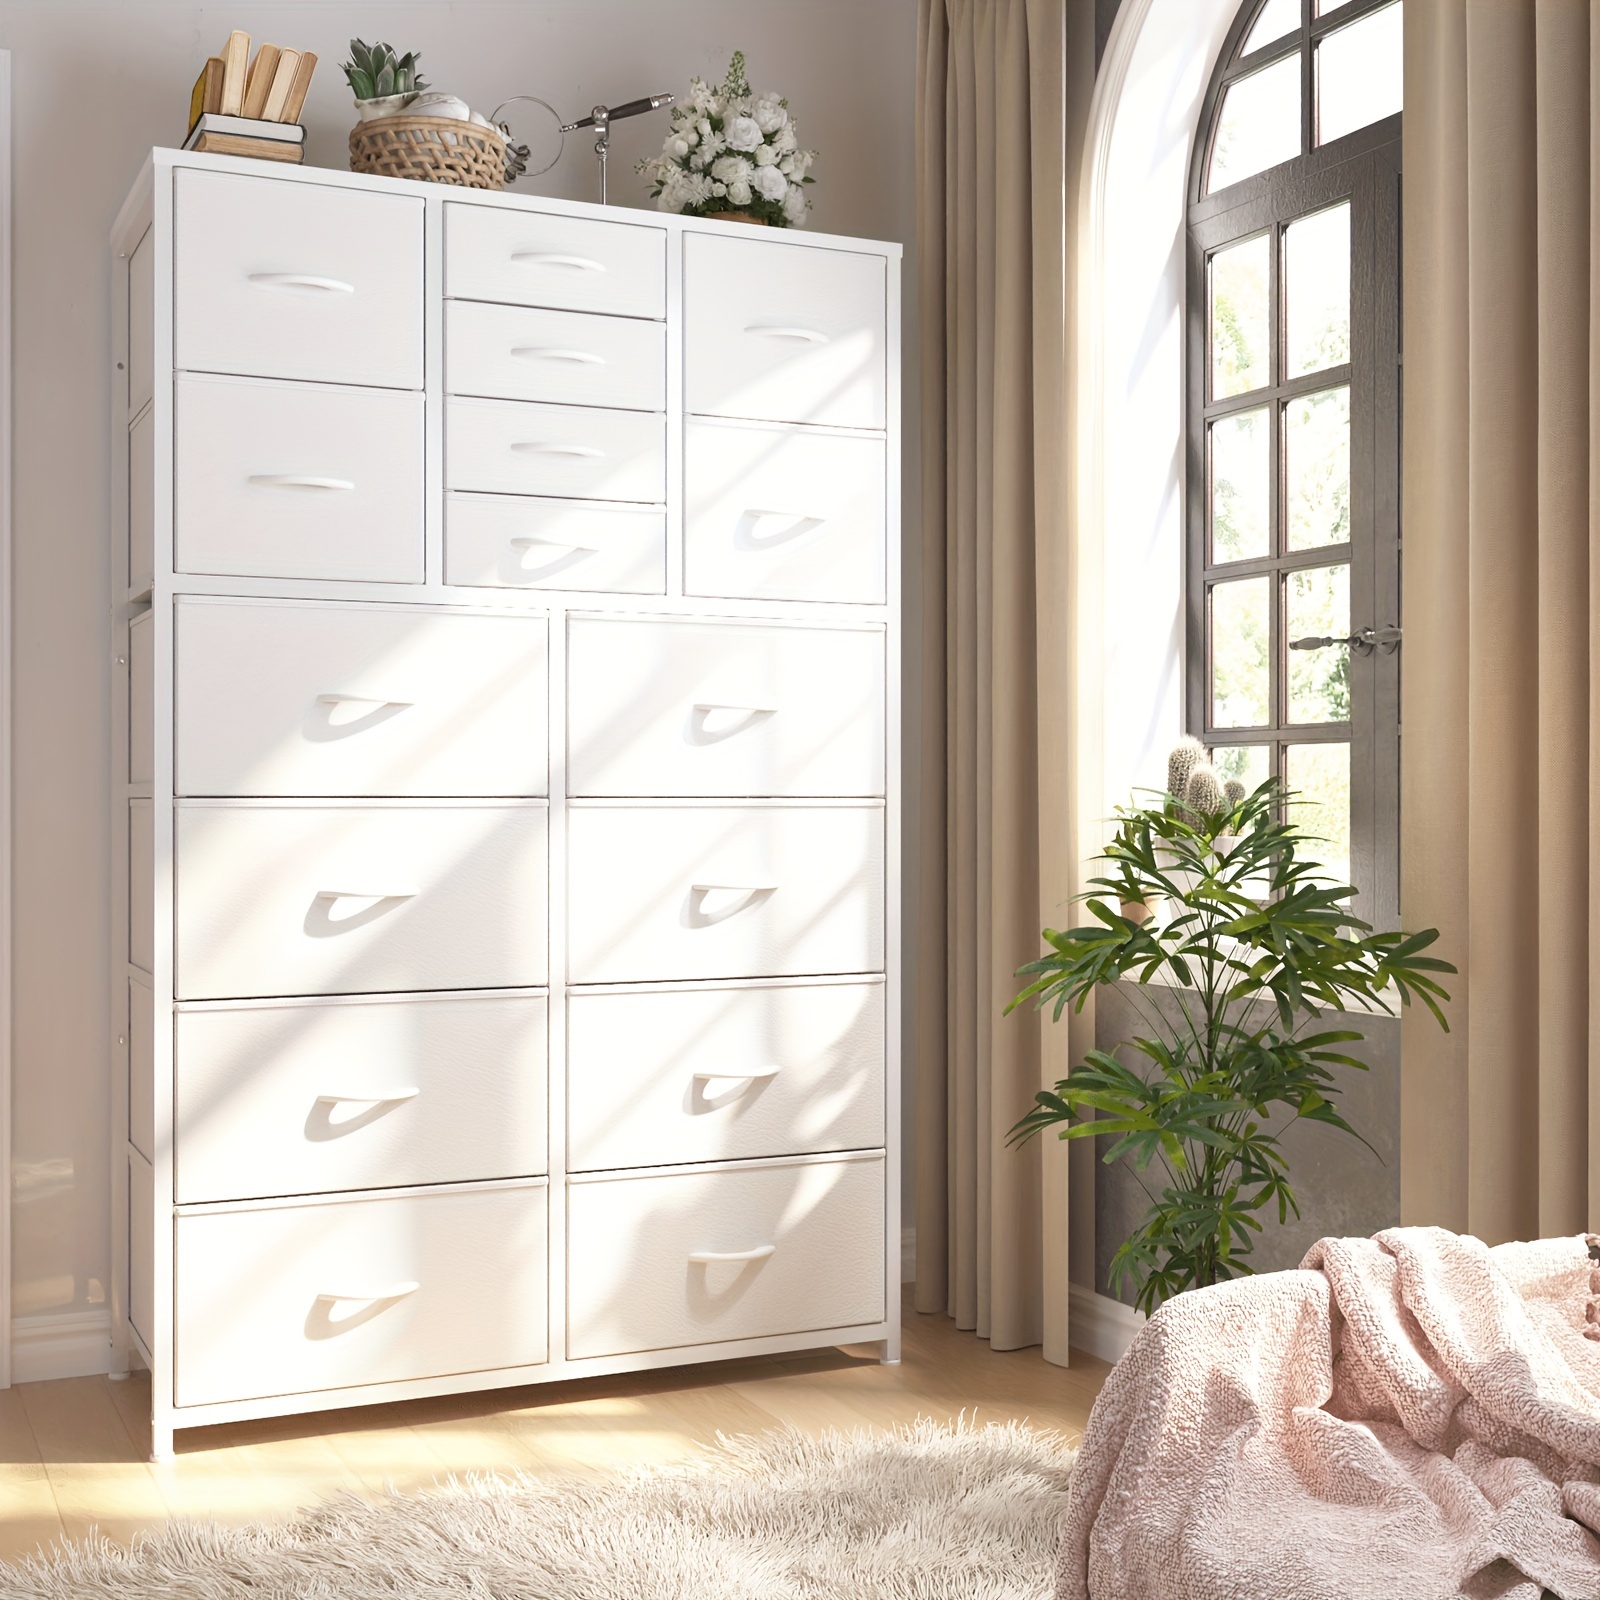 

White Dresser For Bedroom With 16 Drawers, White Tall Dressers For Bedroom With Wooden Top And Metal Frame, White Dressers & Chest Of Drawers For Bedroom, Closet, Nursery, Bedroom, White